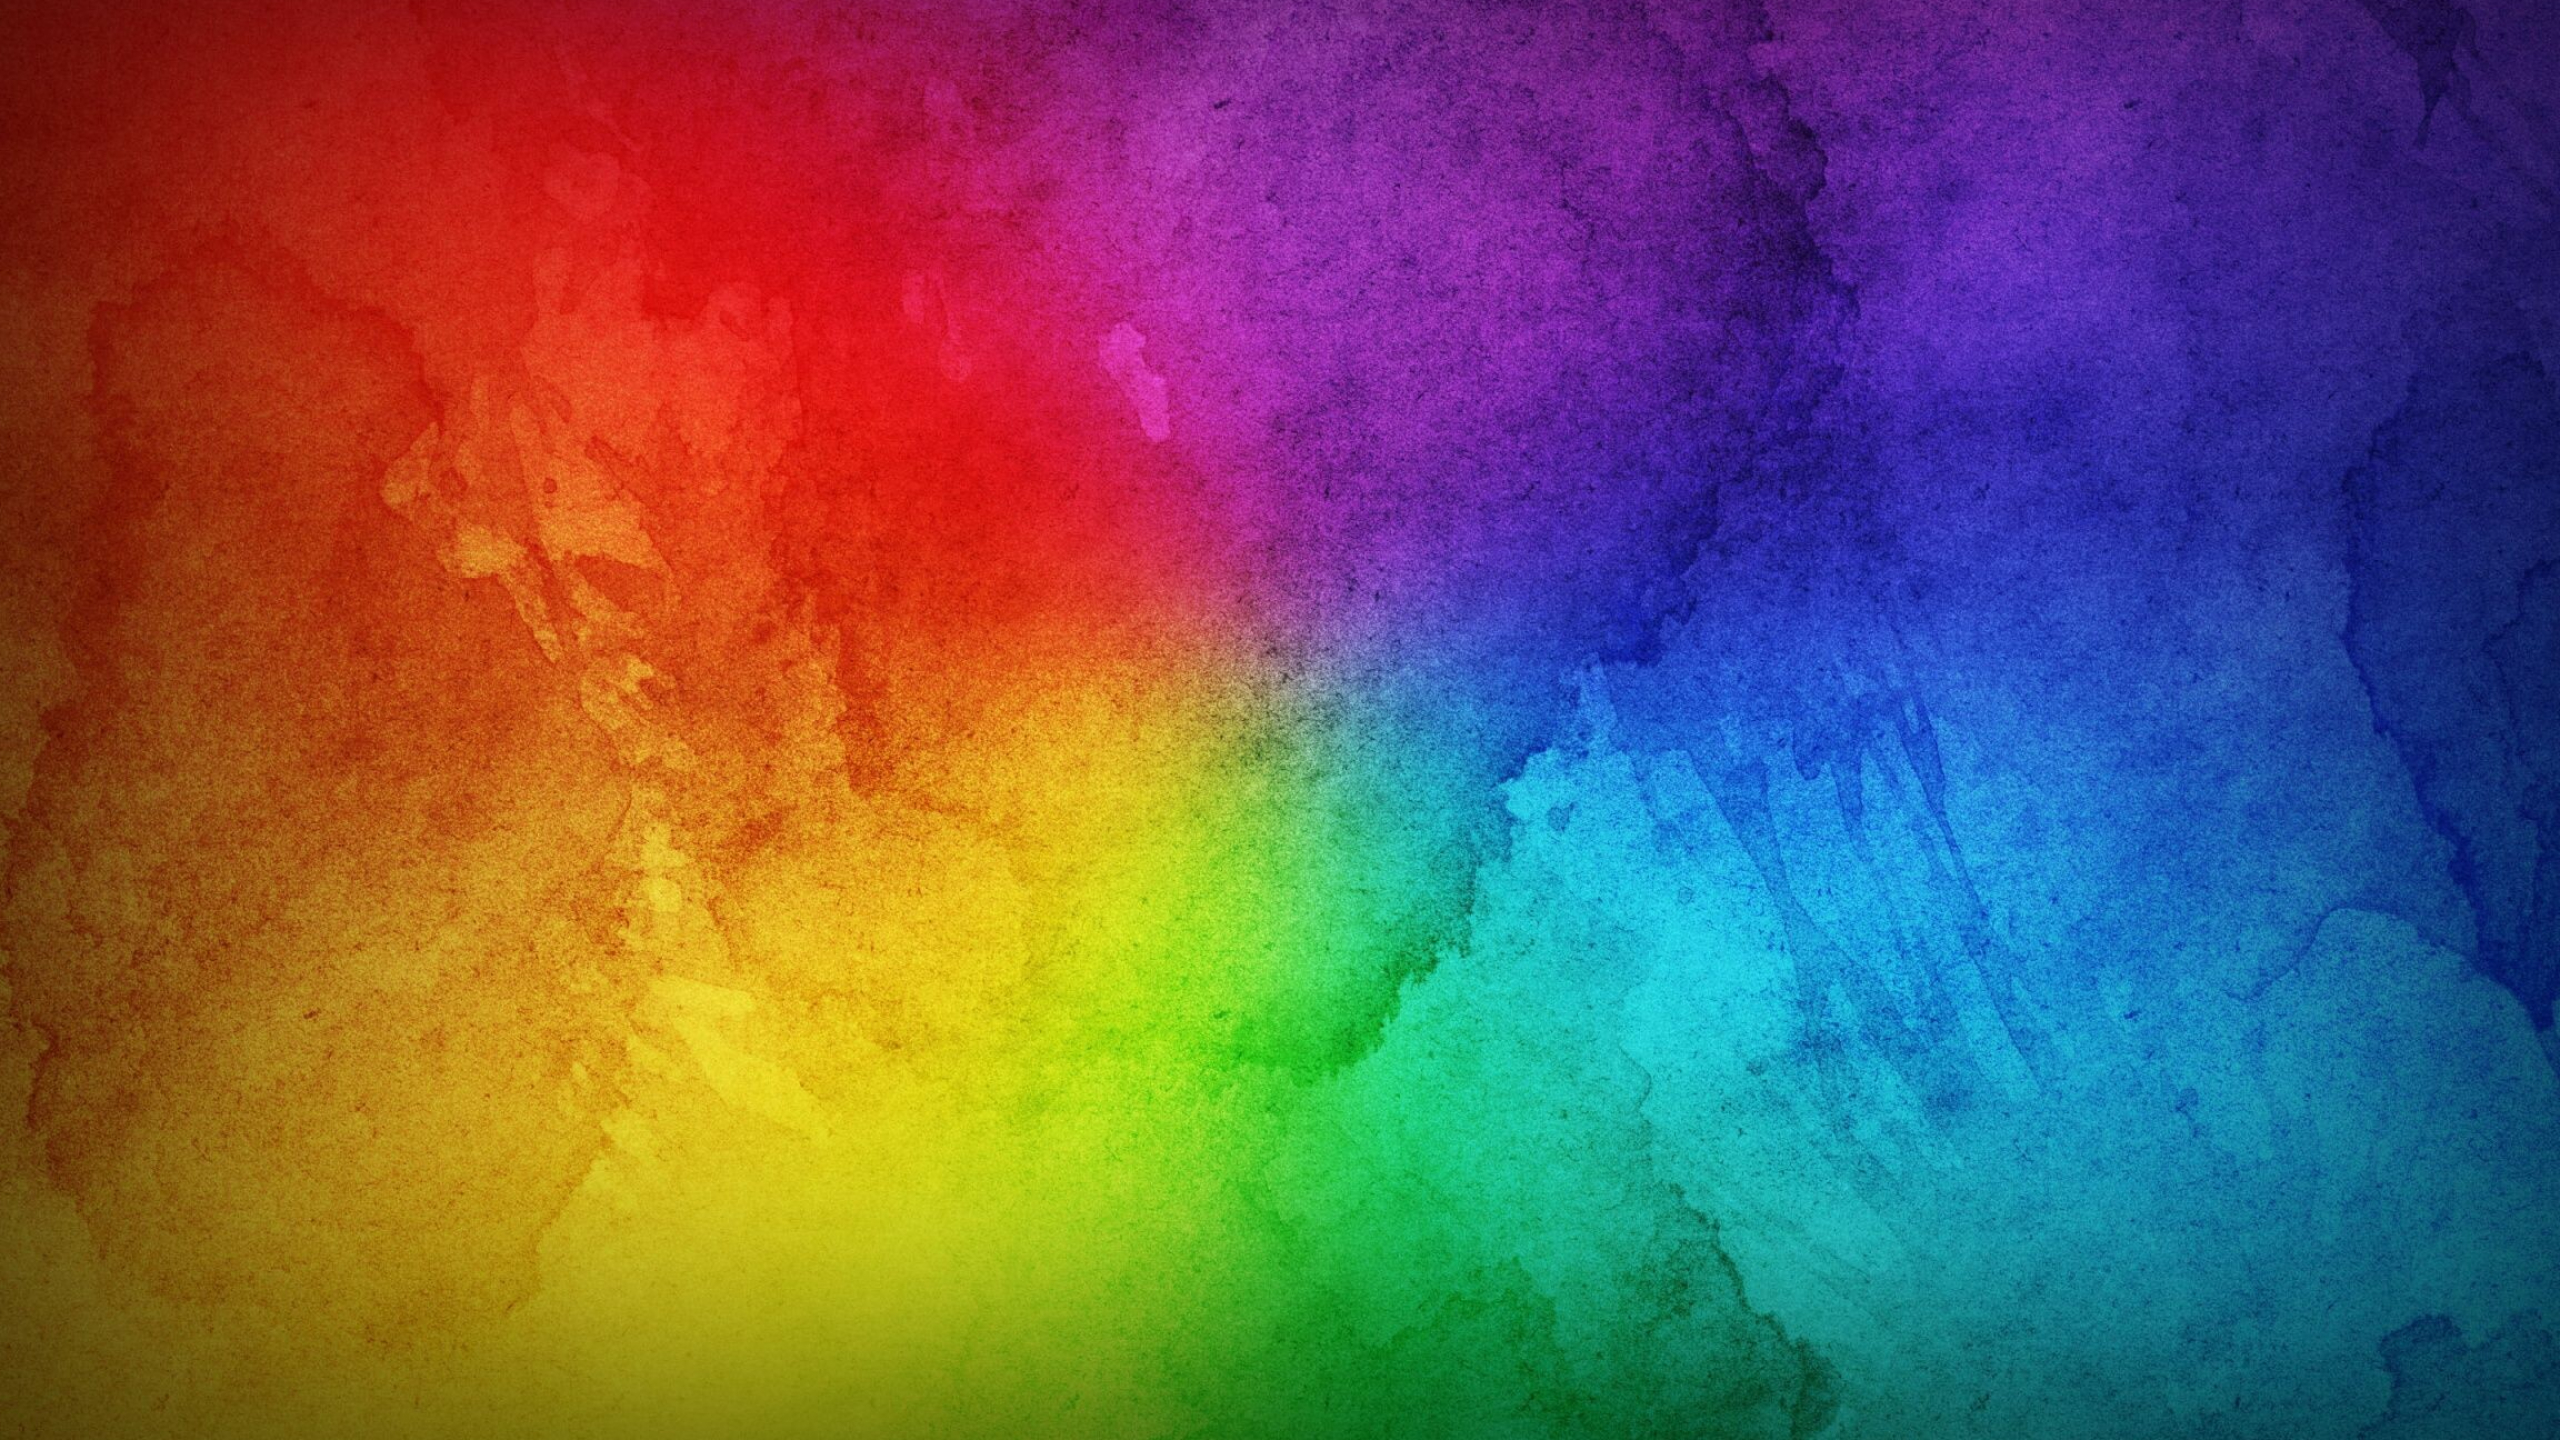 Rainbow Colors: Multitone gradient, Tints and shades, An abstract art. 2560x1440 HD Wallpaper.